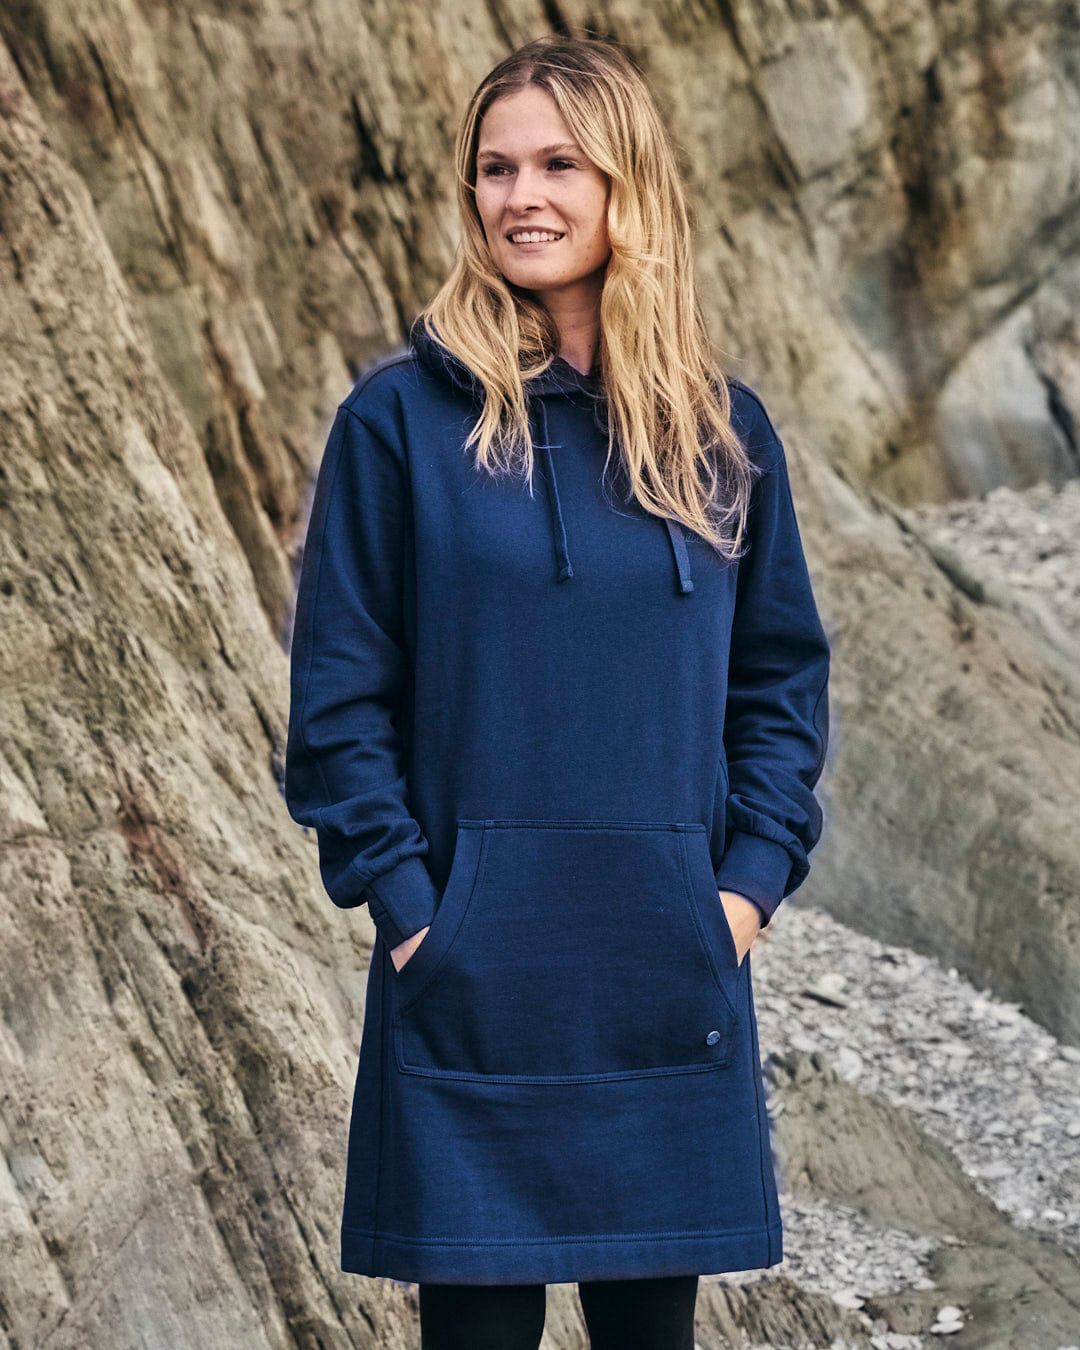 A woman in a Saltrock Elsa - Womens Hooded Sweat Dress - Dark Blue standing on a rock, showcasing both comfort and style.